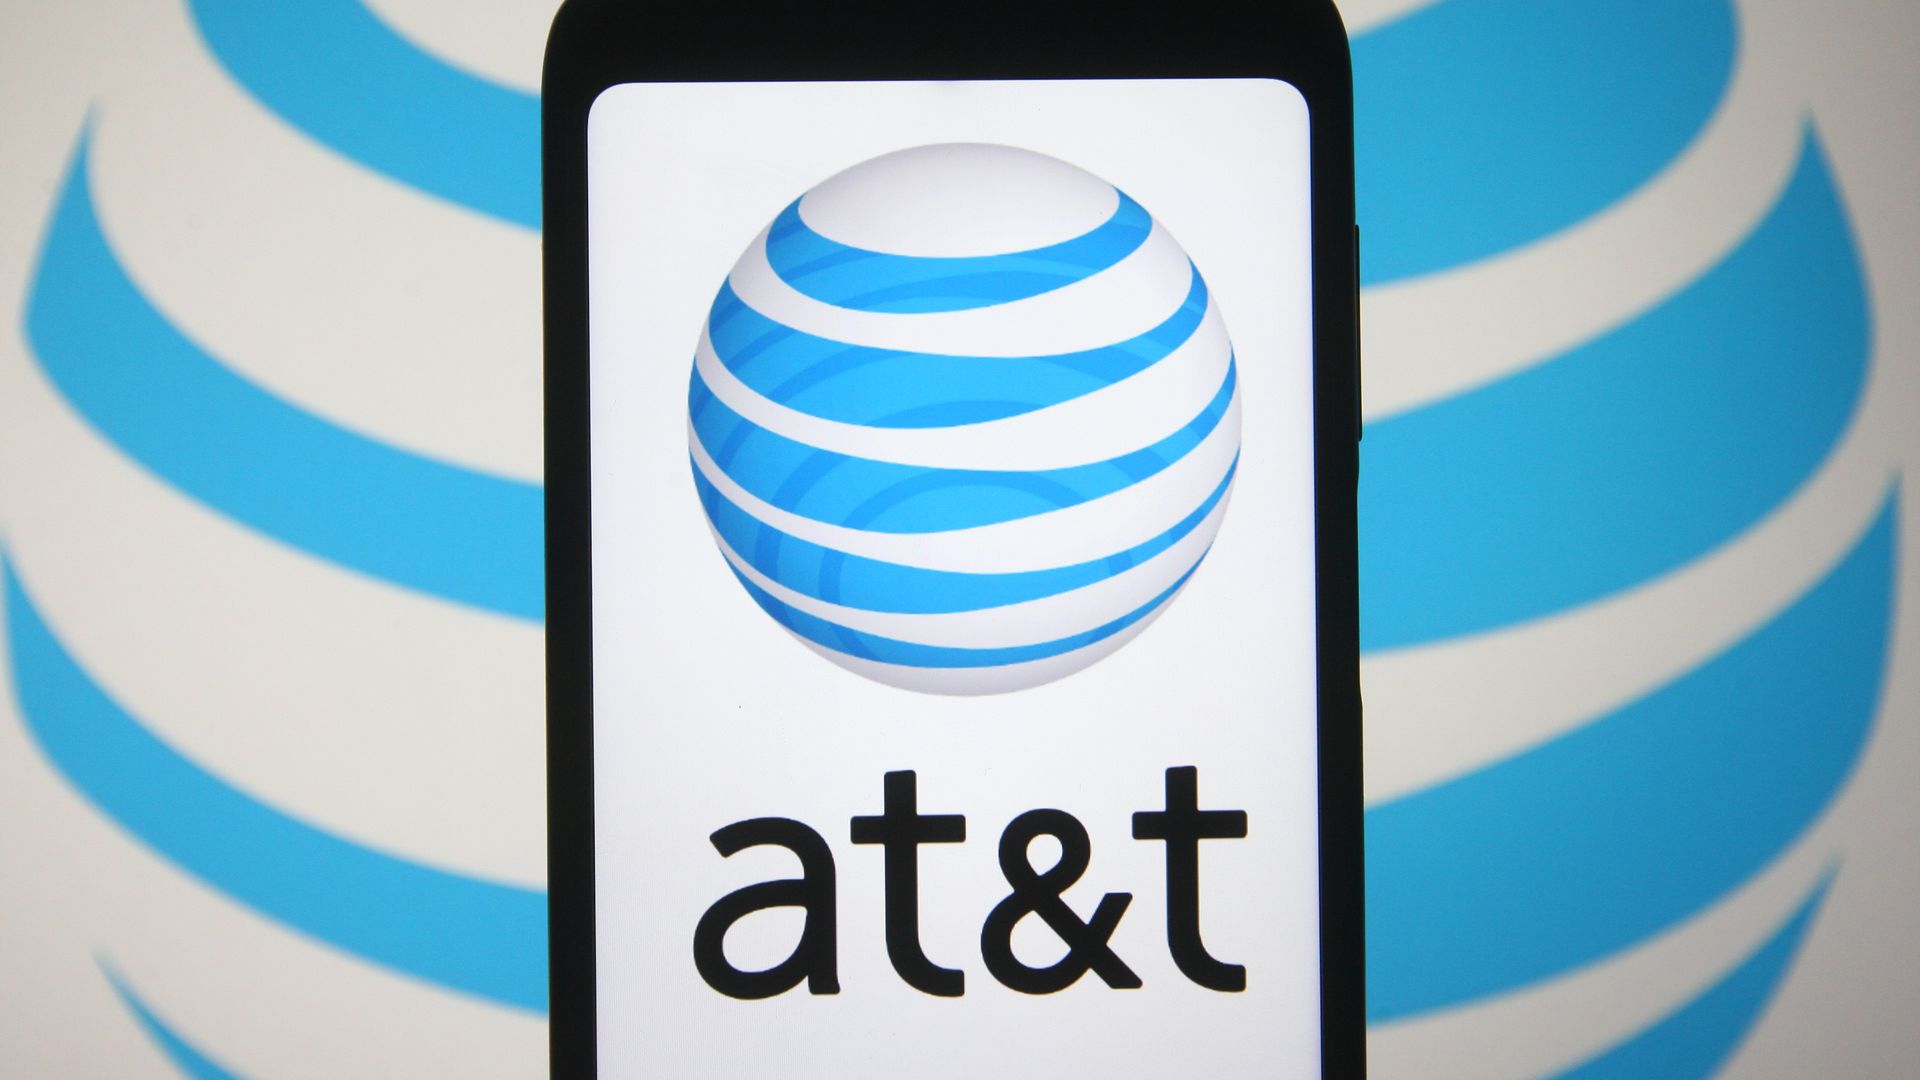 Image of AT&T logo on a phone screen in front of another AT&T logo